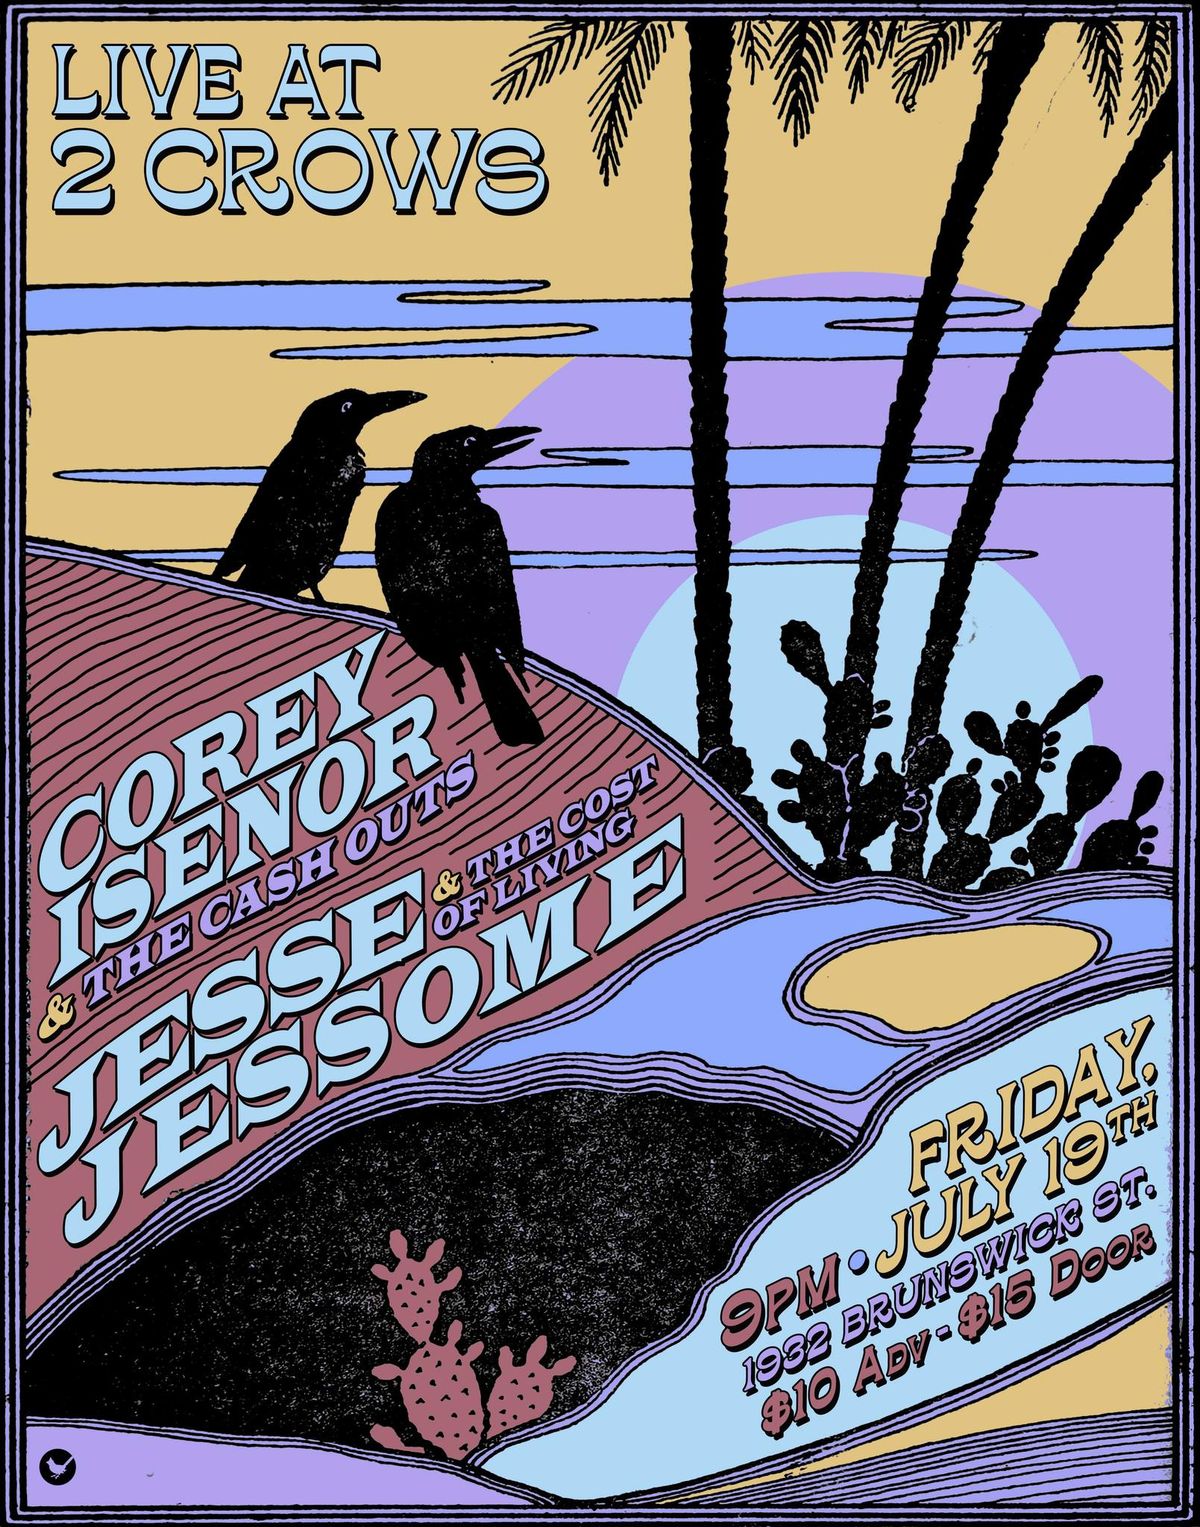 Corey Isenor & The Cash Outs AND Jesse Jessome & The Cost of Living - LIVE at 2 Crows Brewing